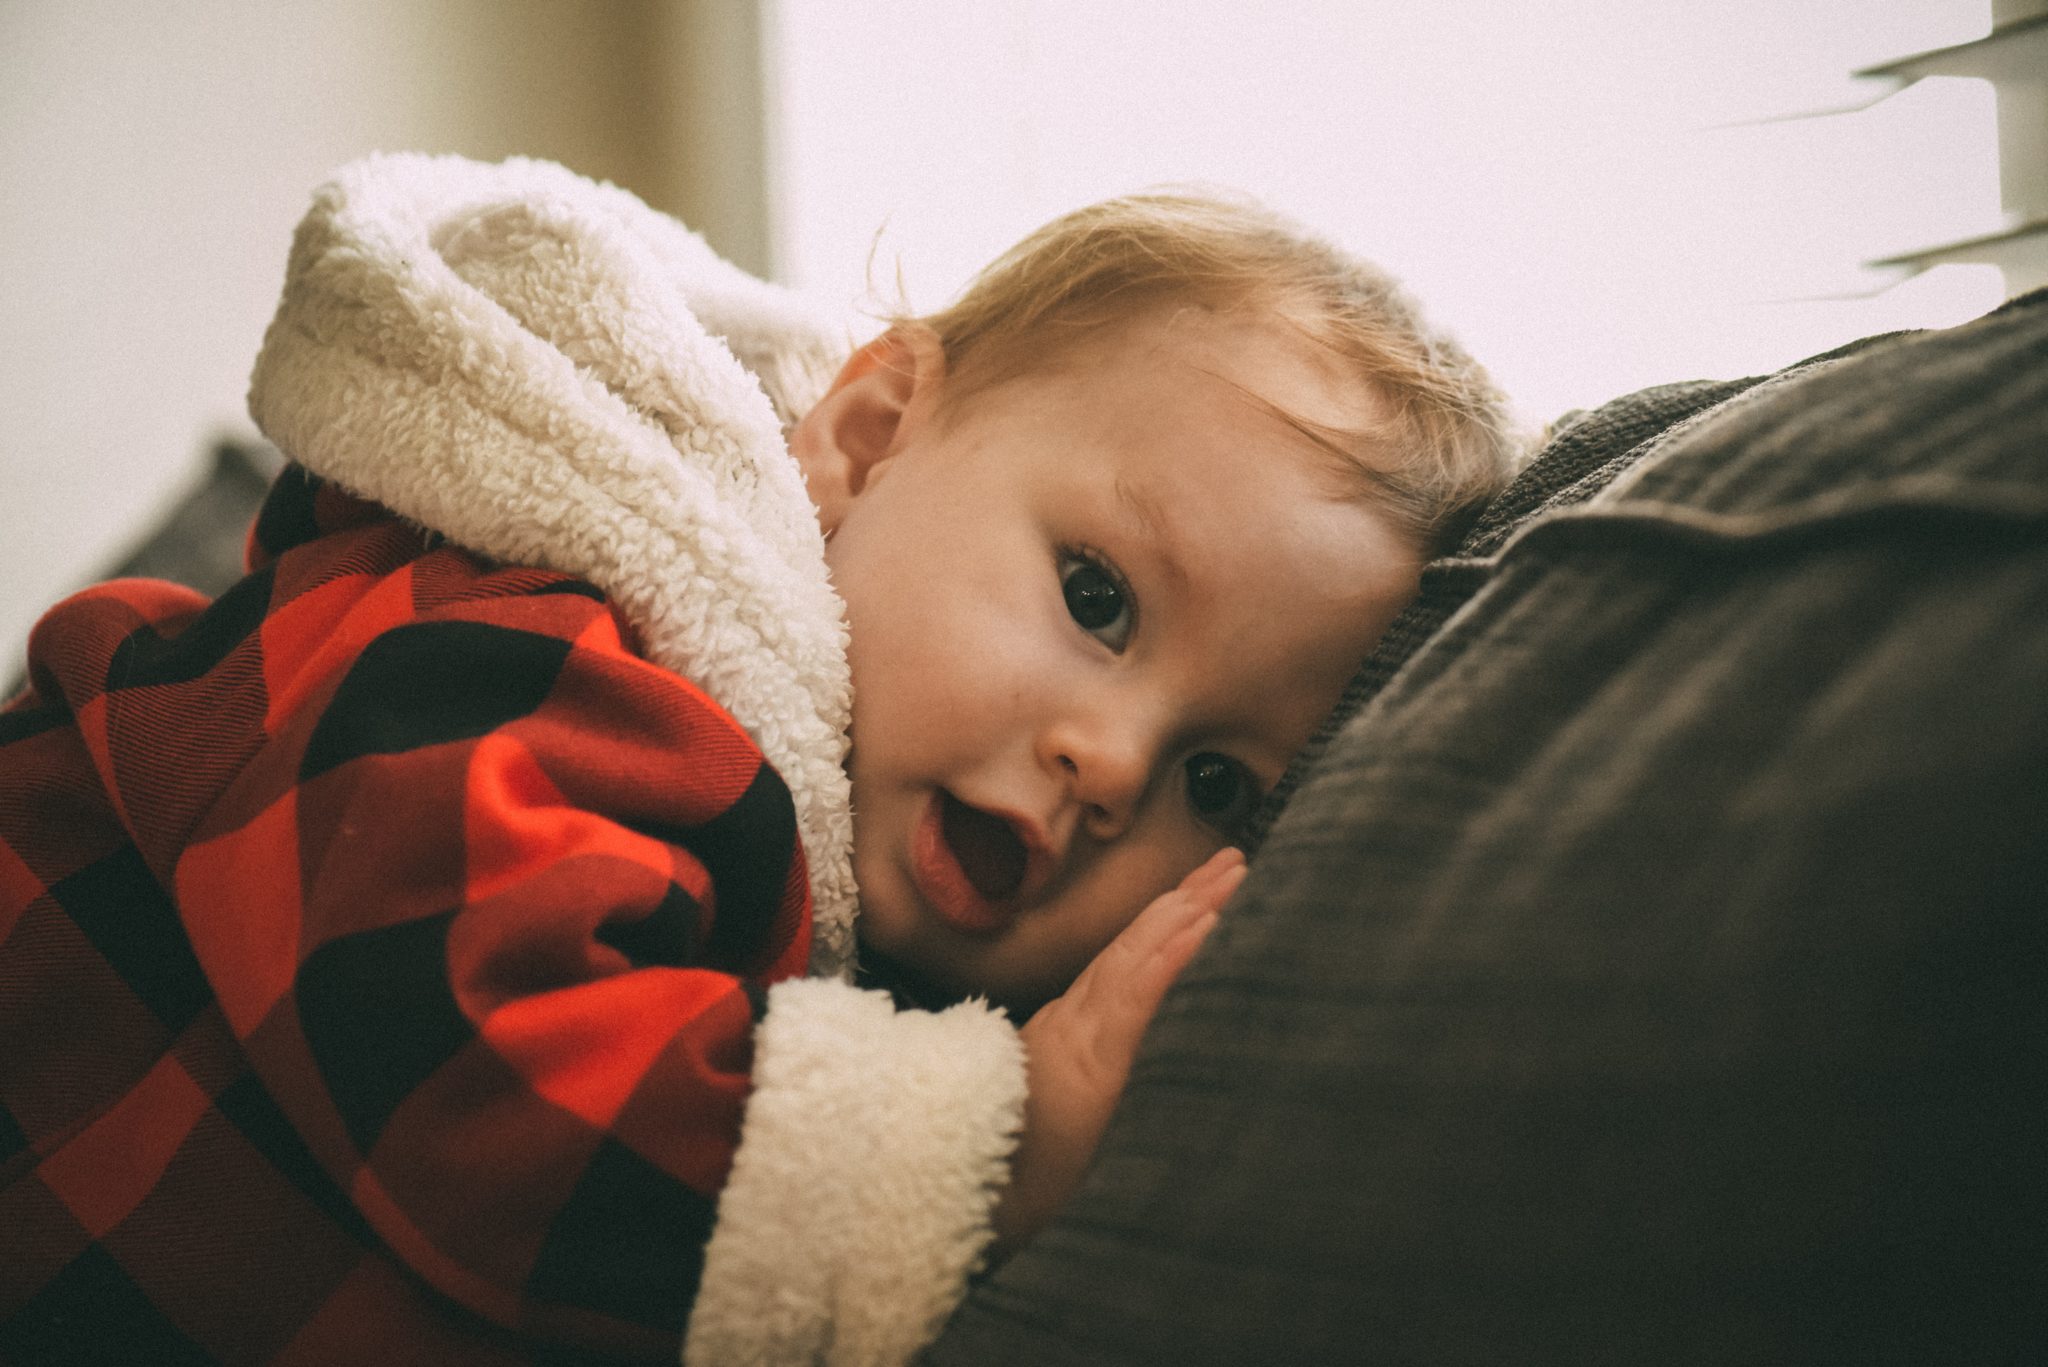 winter skin care tips for babies